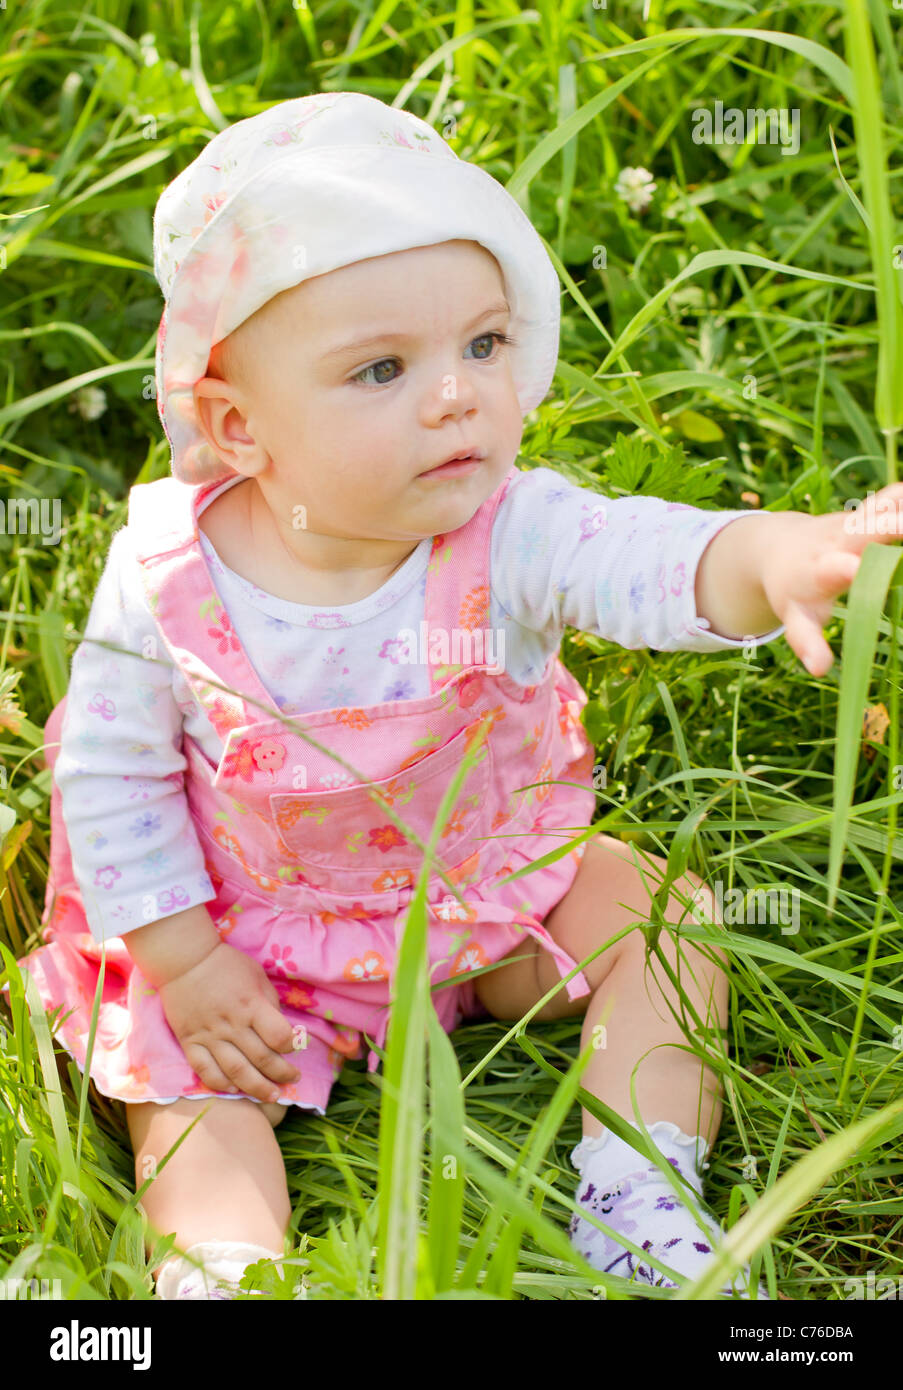 Curious baby girl on grass Stock Photo